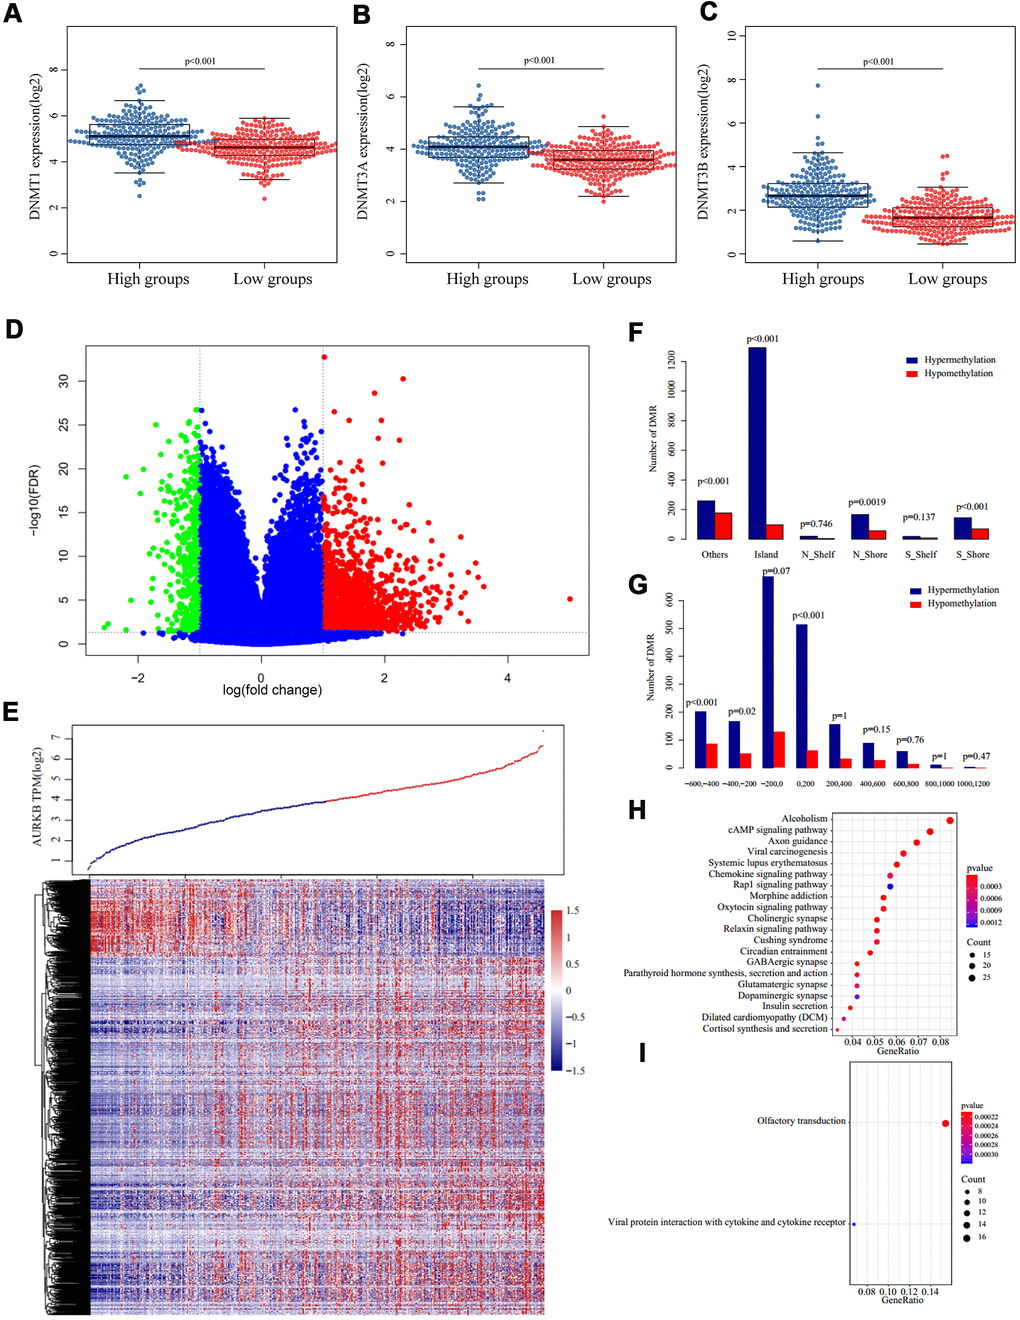 Methylation patterns associated with AURKB expression. (A–C) Expression of three DNA methyltransferases ((A) DNMT1, (B) DNMT3A, (C) DNMT3B) in AURKBhigh and AURKBlow groups, p value as indicated in the figure. (D, E) Volcano plot (D) and heatmap (E) of differentially methylated regions between AURKBhigh and AURKBlow groups (red and green mean significantly DMRs, cutoff fold change 1.3, FDR 0.05). (F, G) Distribution of DMRs on gene’s different structural regions and the distance to TSS. (H, I) KEGG analysis of hypermethylated genes were enriched into 36 pathways, top 20 were listed in (H), while hypomethylated genes were only enriched into two pathways, as shown in (I).